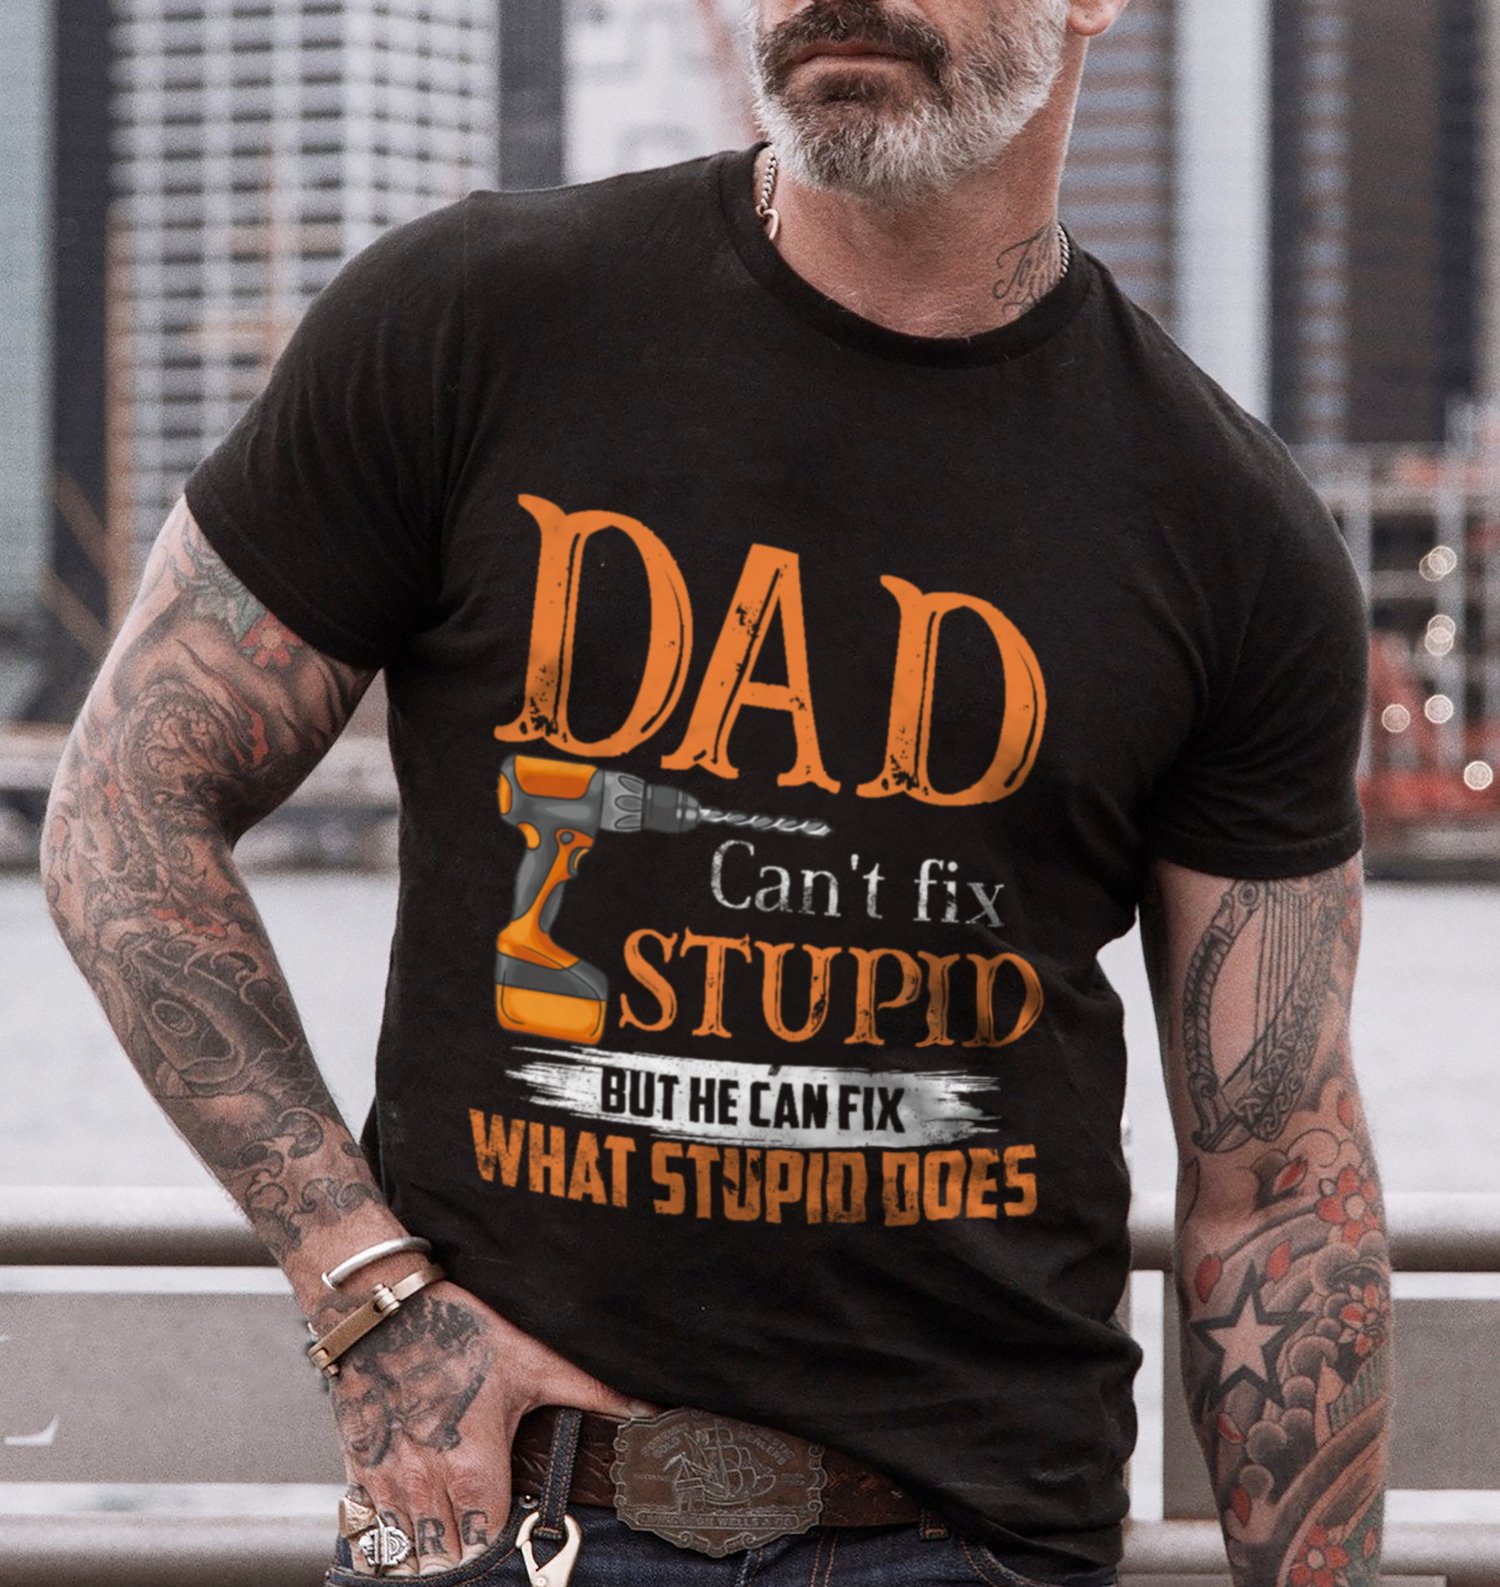 Dad can't fix stupid but he can fix what stupid does